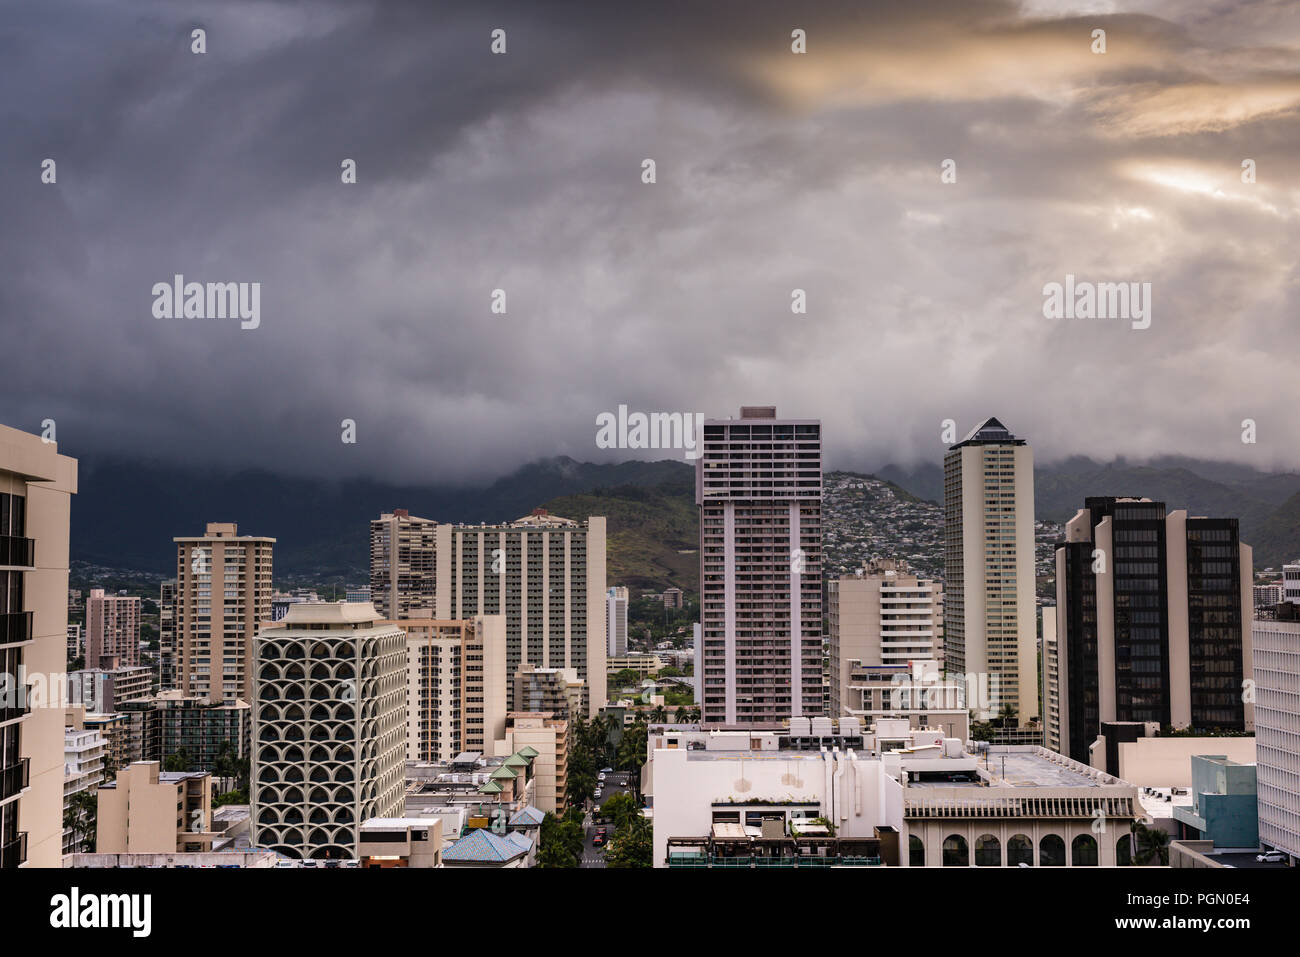 Honolulu, Hawaii / USA - August 26, 2018: Aerial view of amazing cloudscape over Waikiki tall buildings as aftermath of Hurricane Lane lingers. Stock Photo